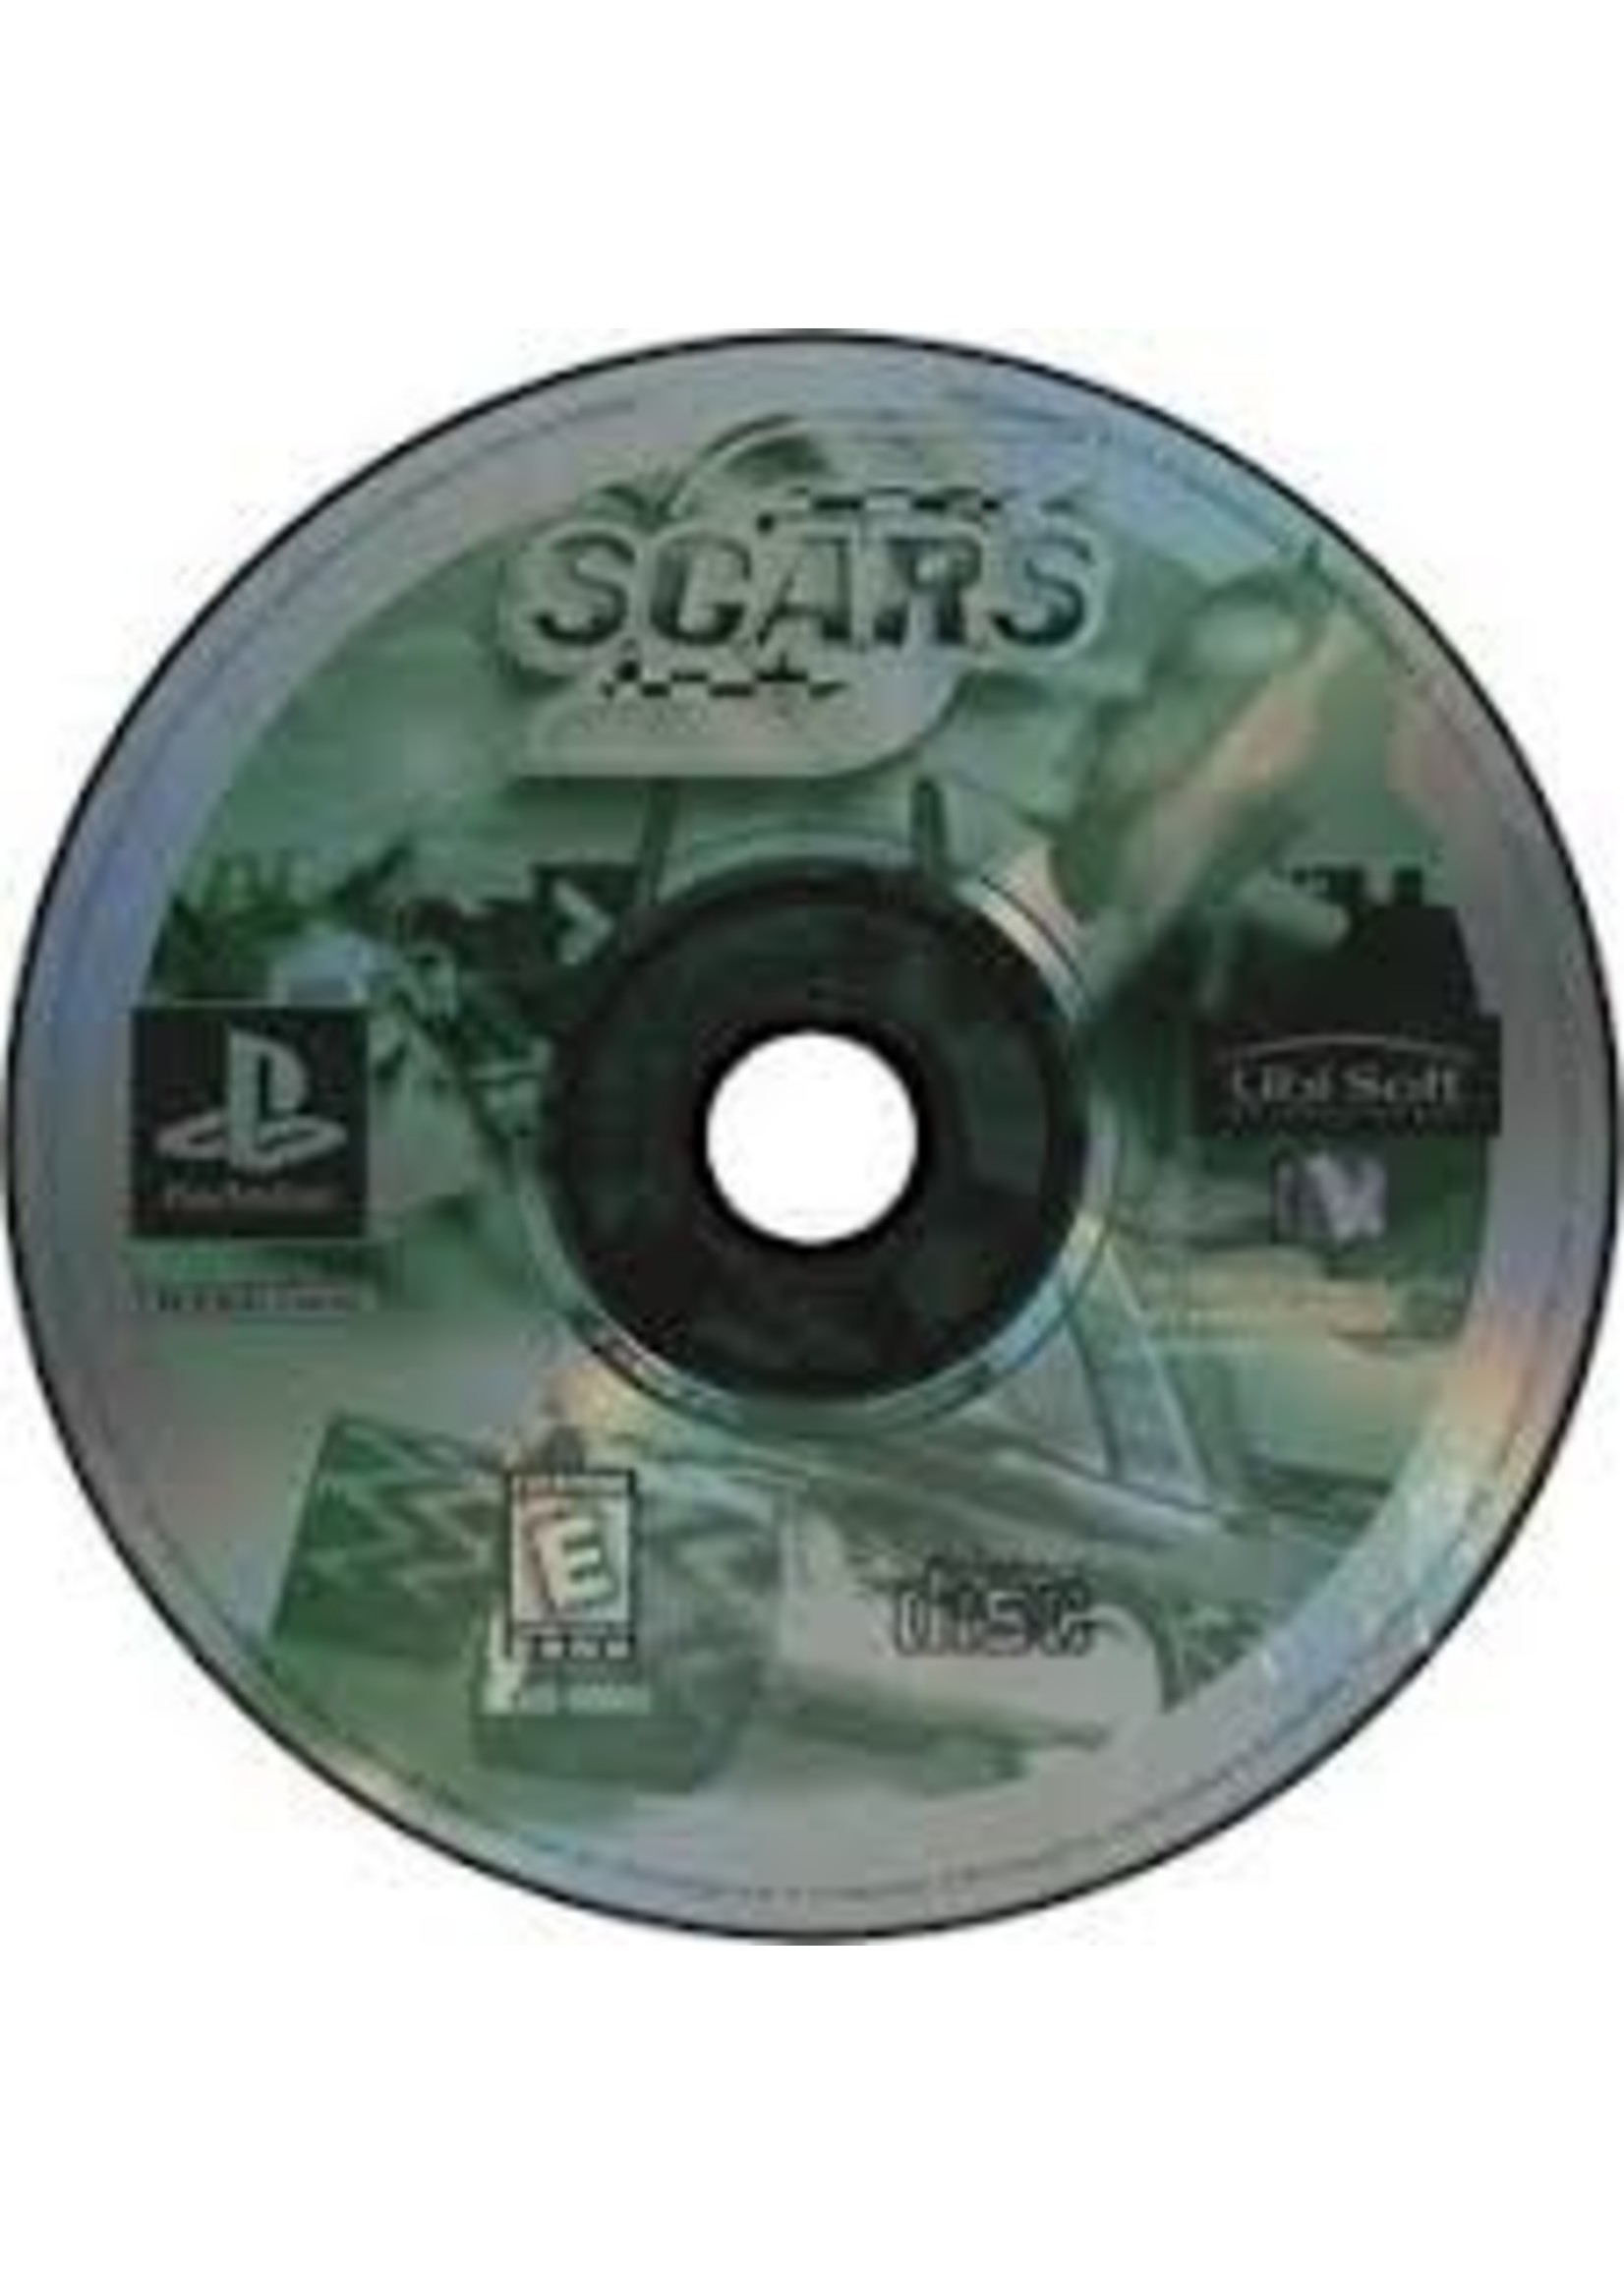 Sony Playstation 1 (PS1) SCARS - Print